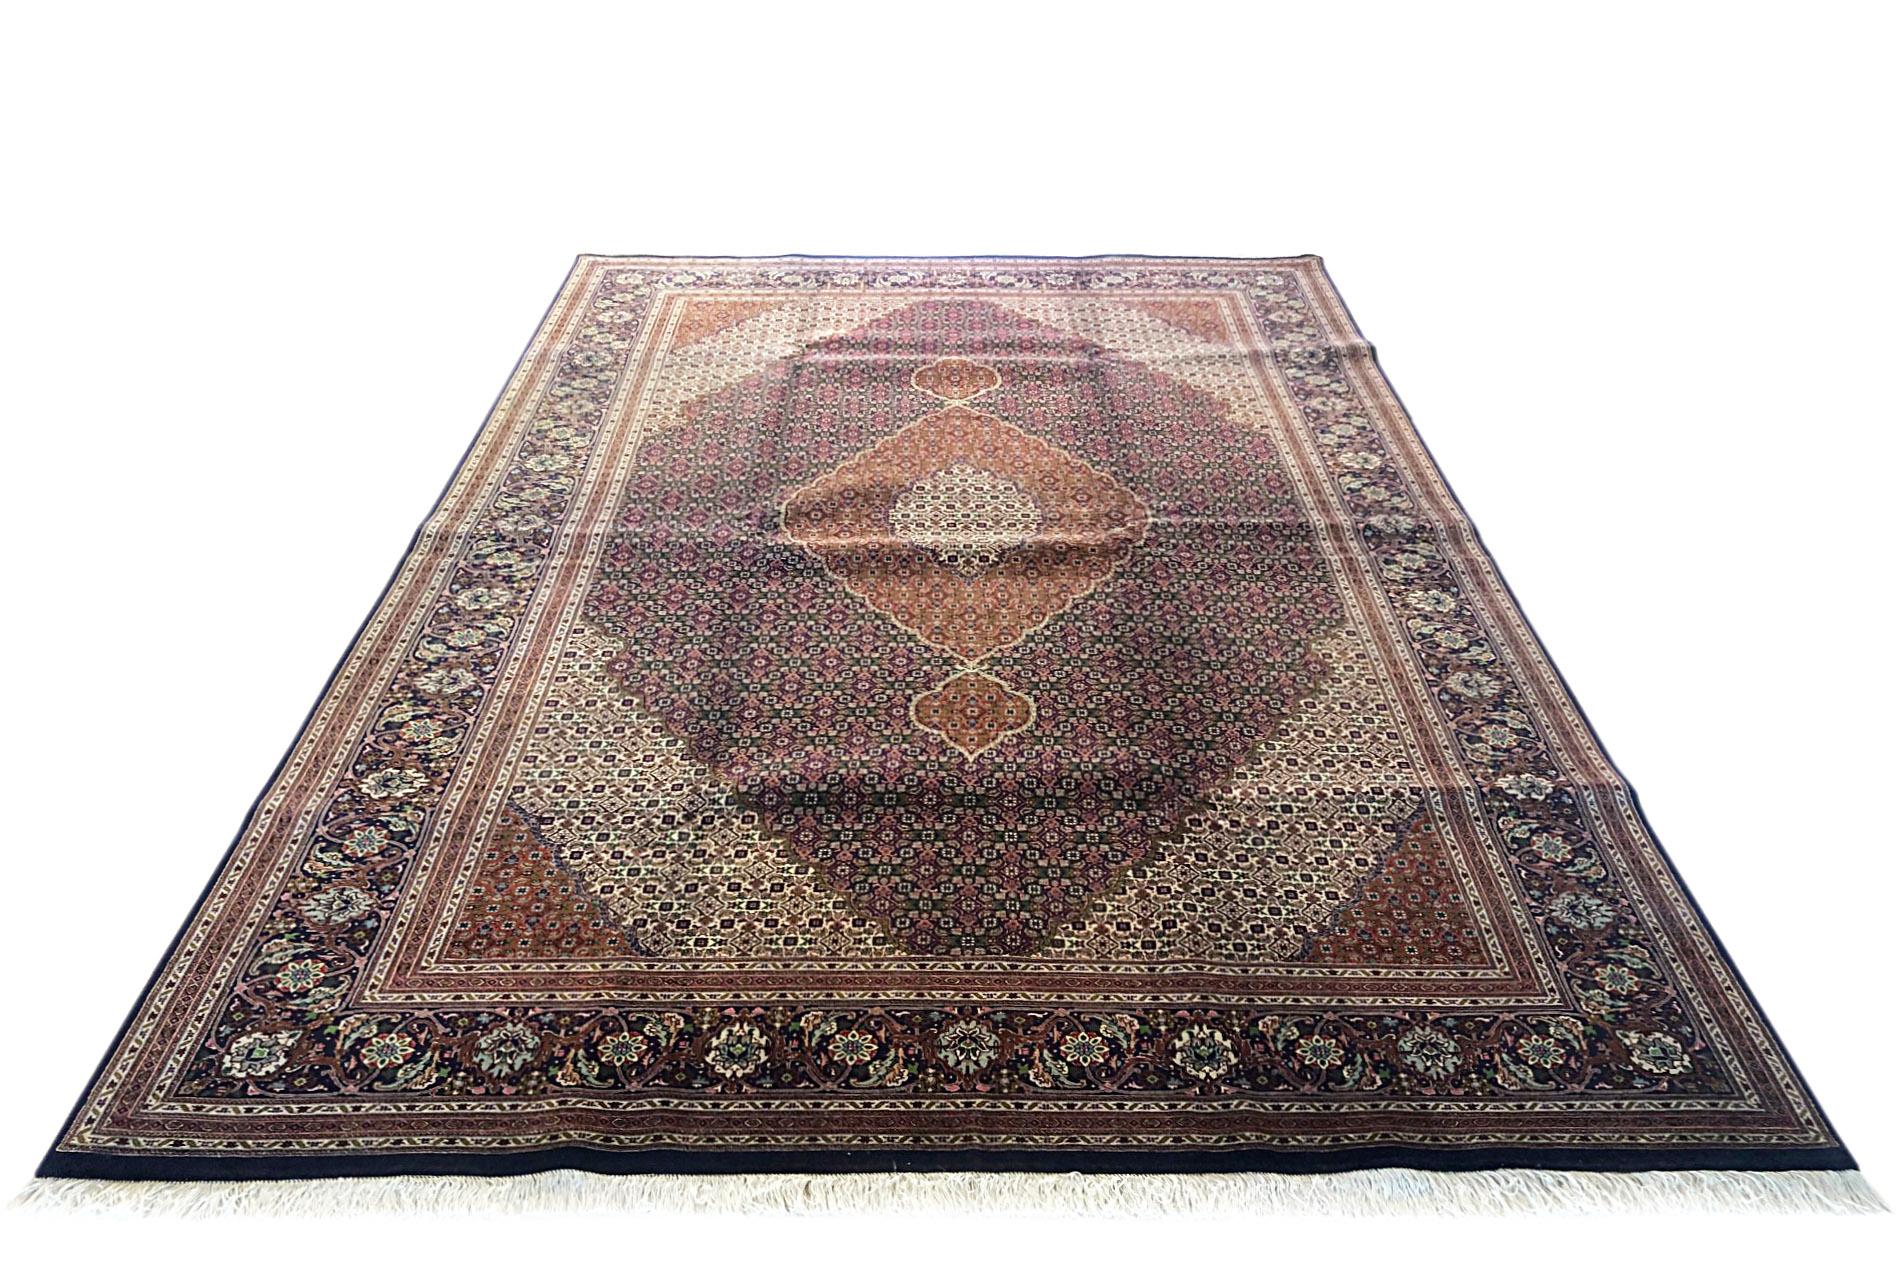 Tabriz rugs are well known for their excellent weaving and design. One of the very famous patterns of Tabriz rugs are fish design known is Mahi. This beautiful piece has wool and silk pile with cotton foundation. This is an 1970s 50 “Raj” consistent